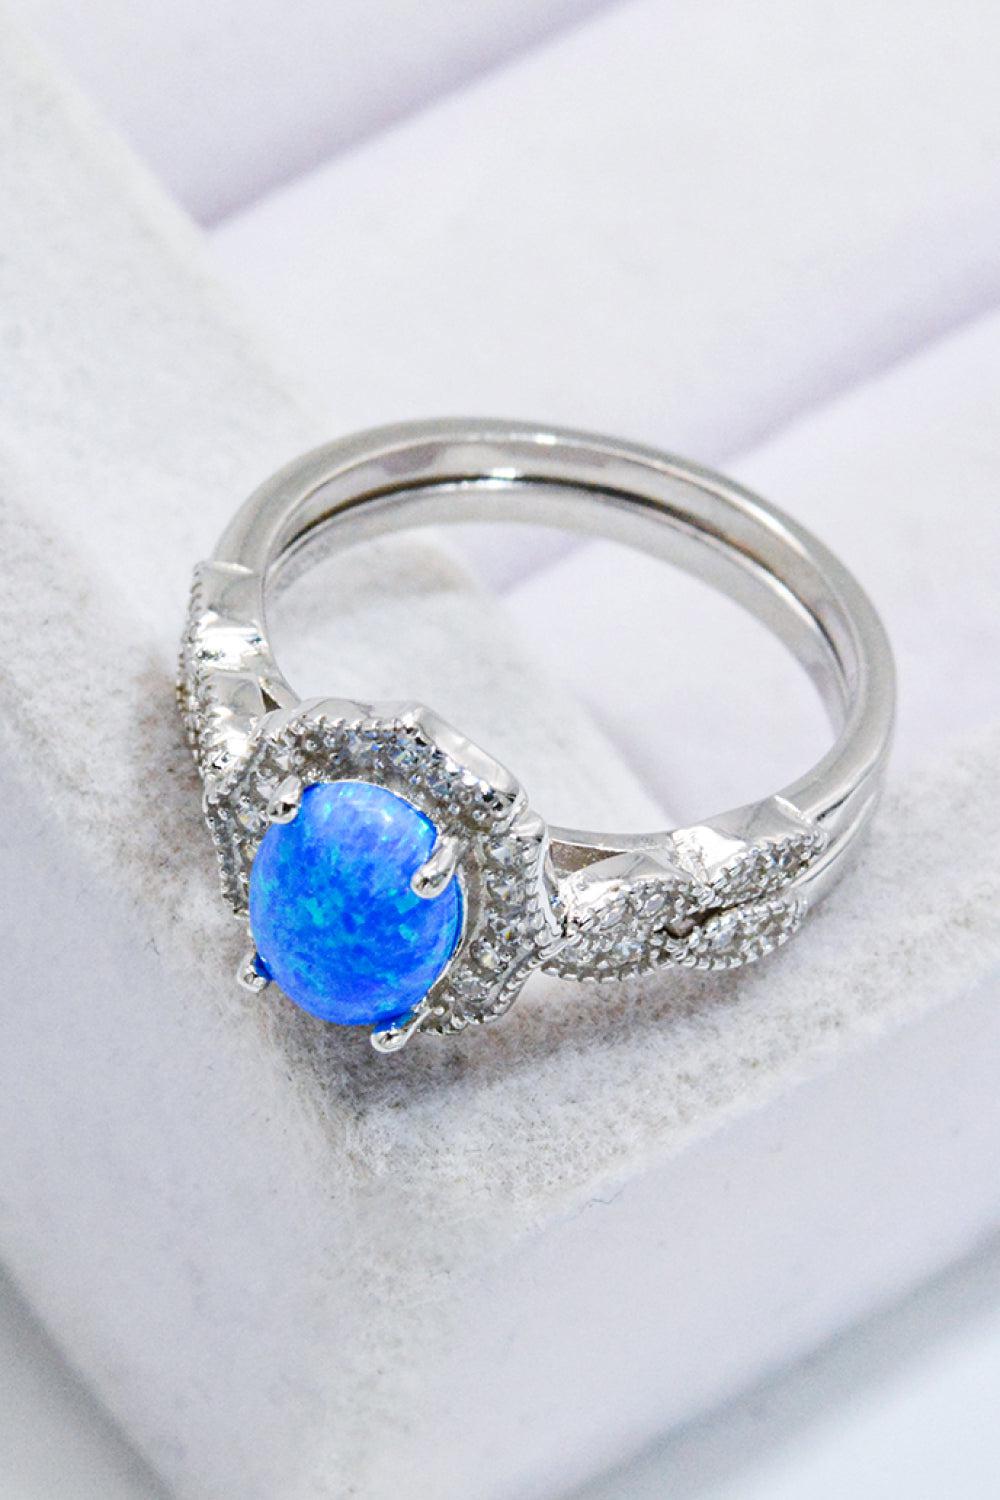 2-Piece 925 Sterling Silver Opal Ring Set BLUE ZONE PLANET